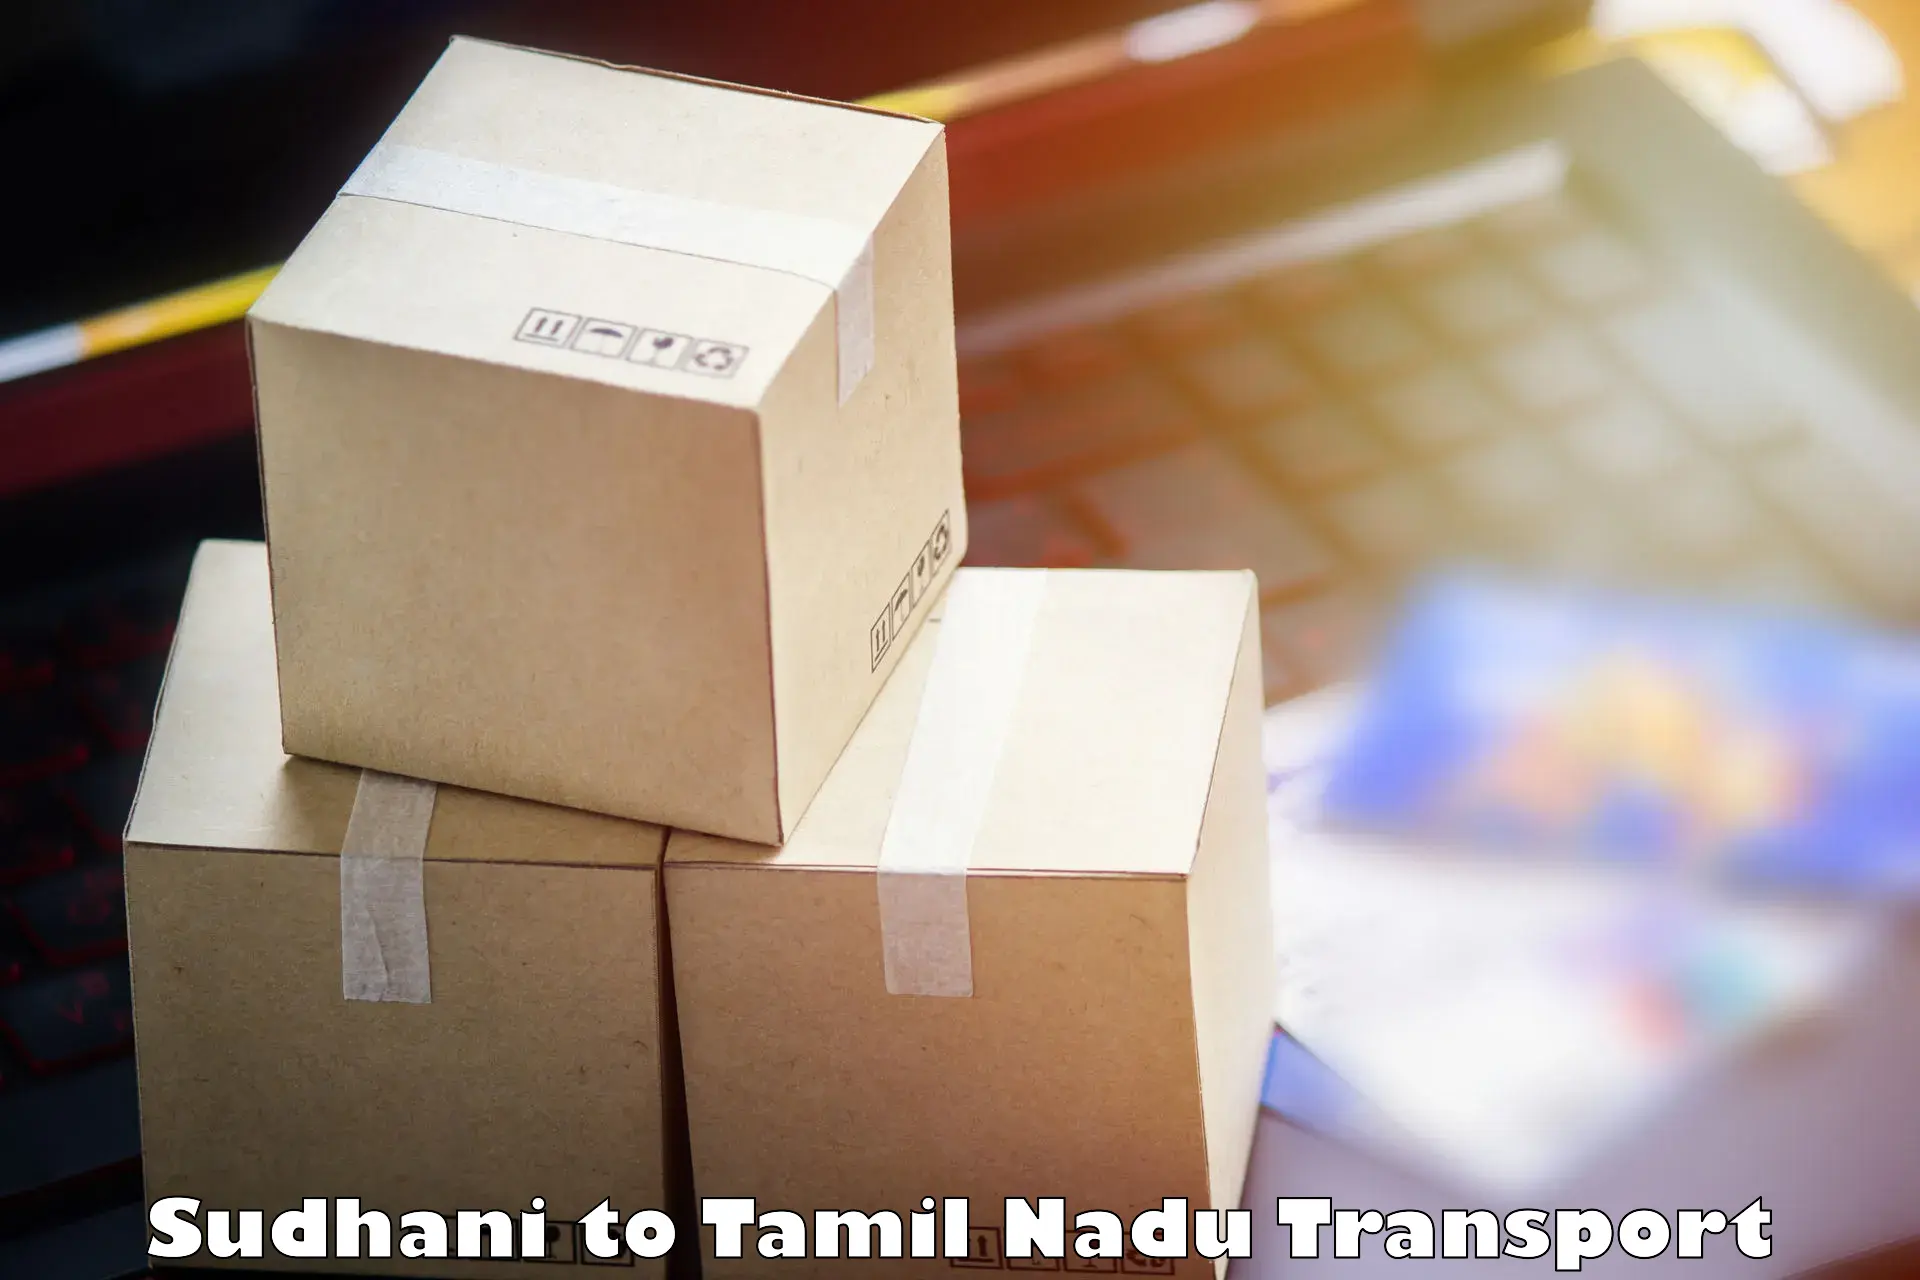 Commercial transport service Sudhani to Ayyampettai